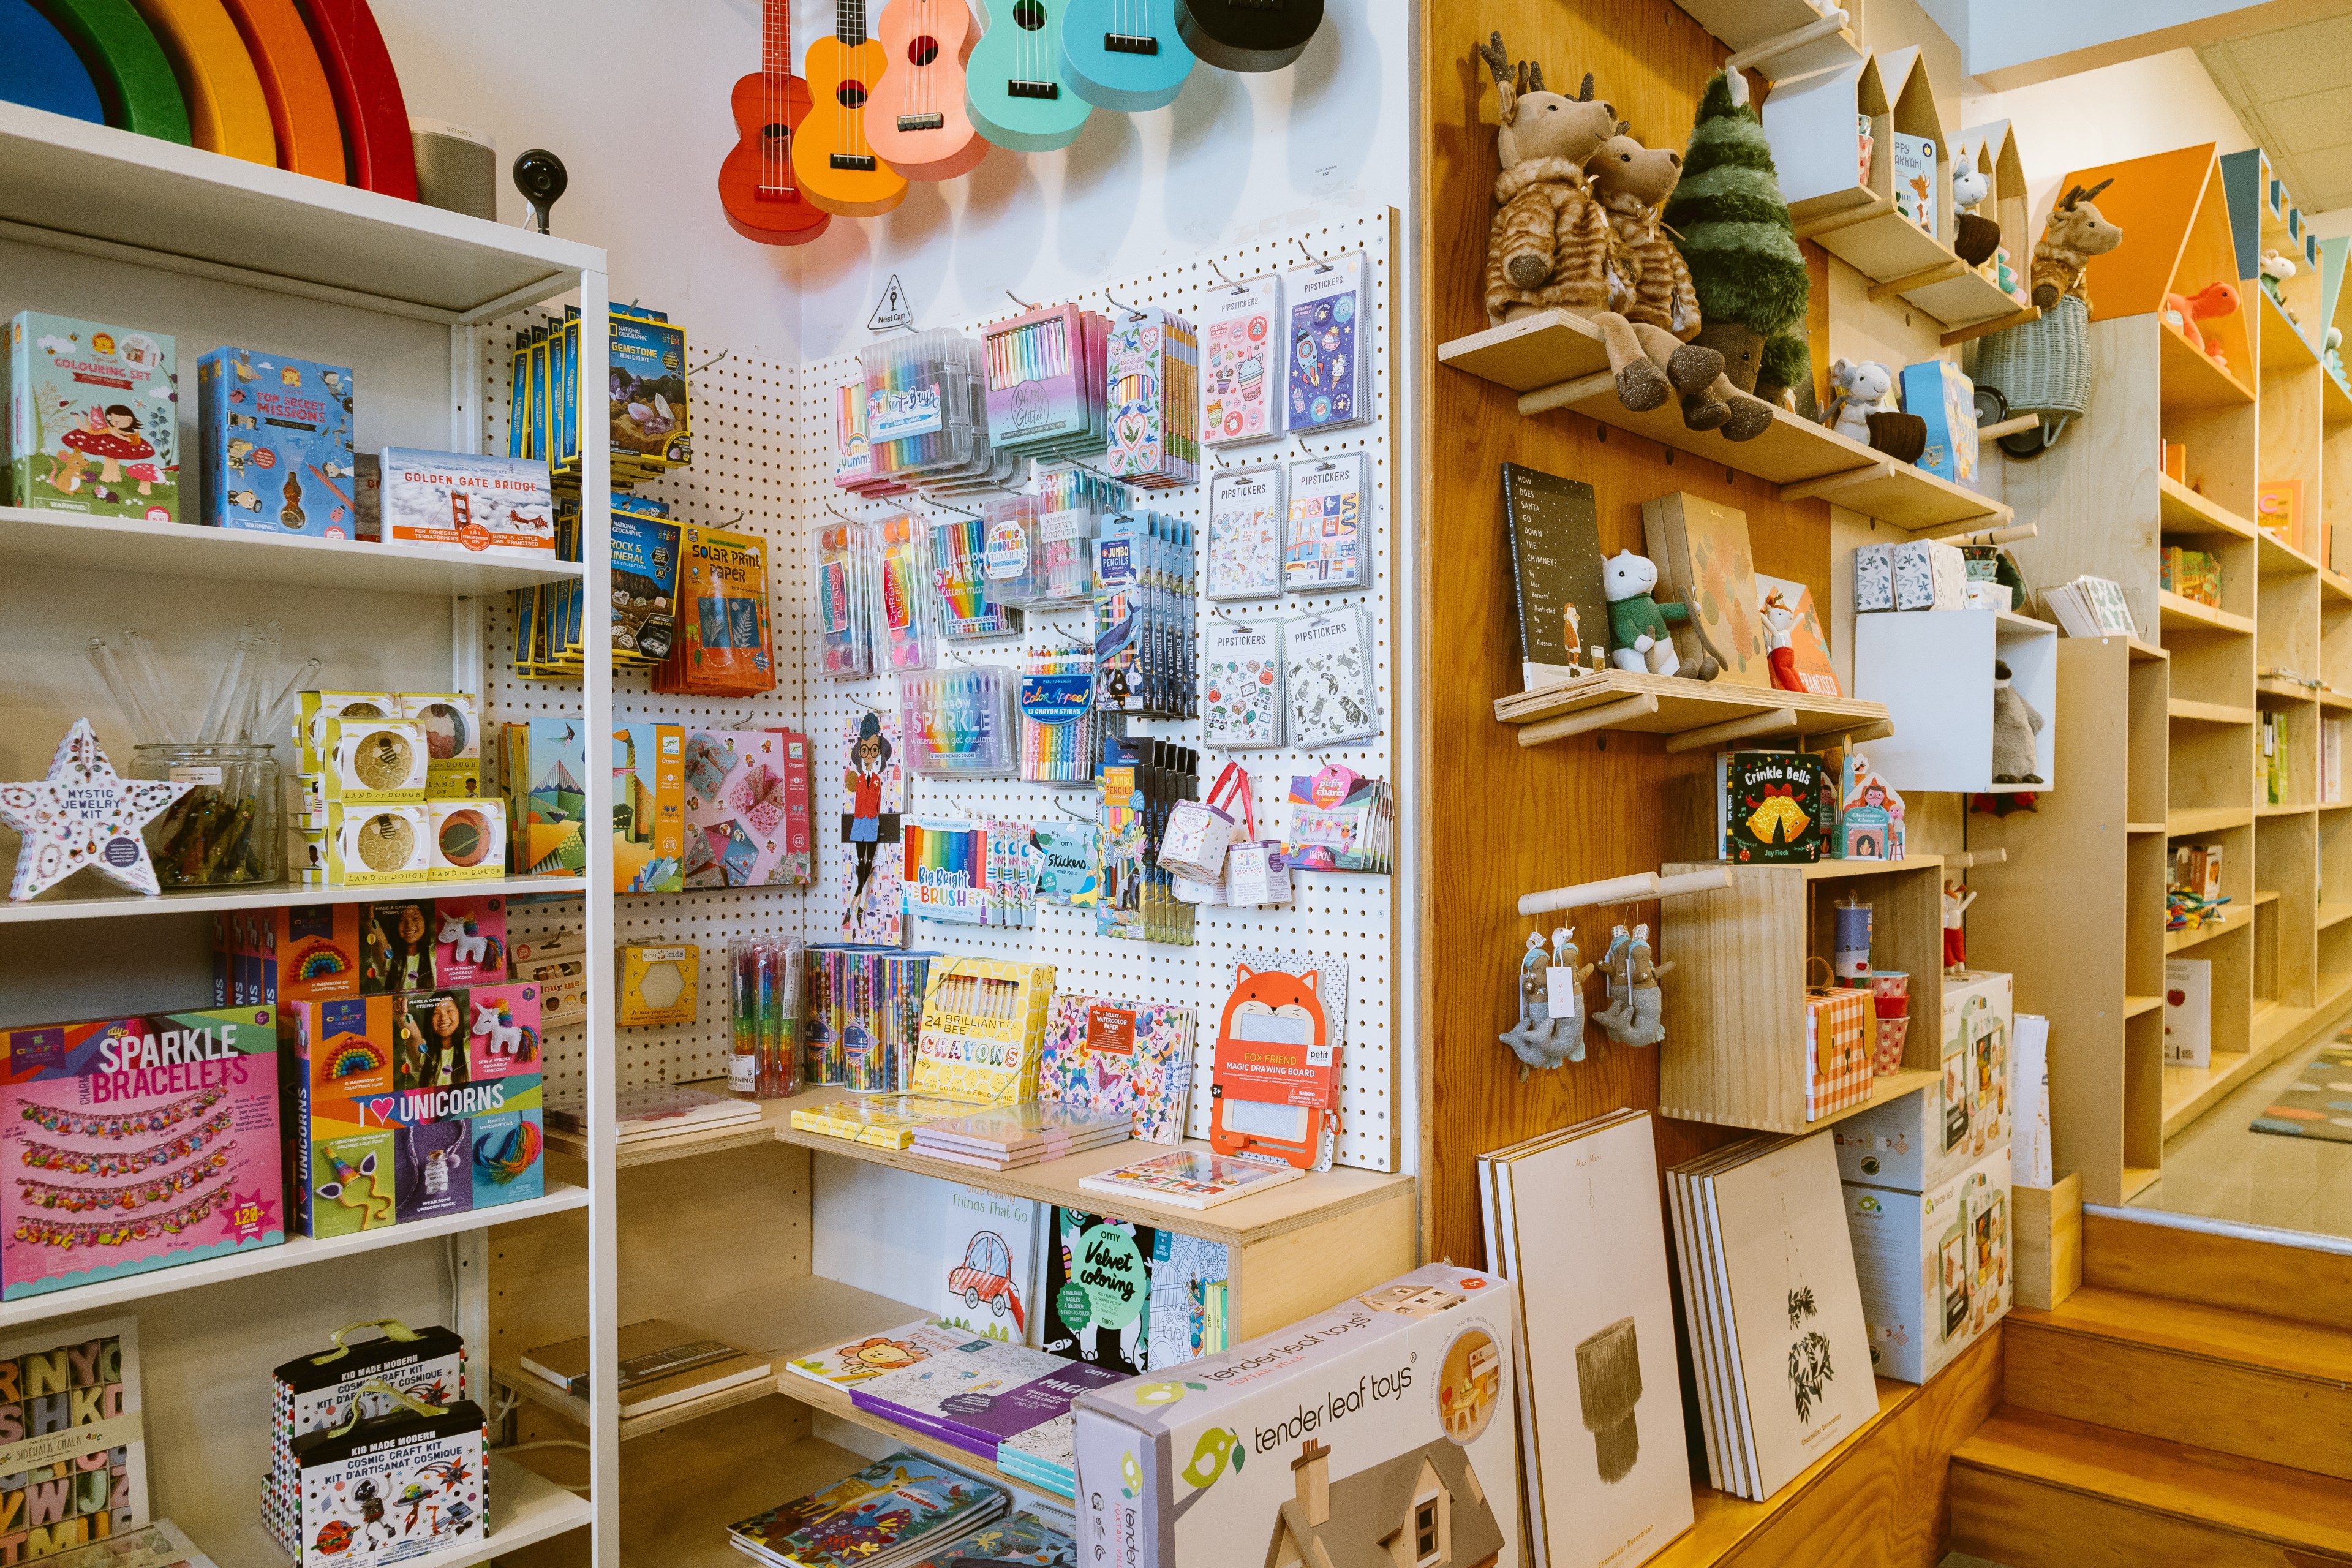 A selection of toys and games for kids including art supplies, guitars and stuffed animals.